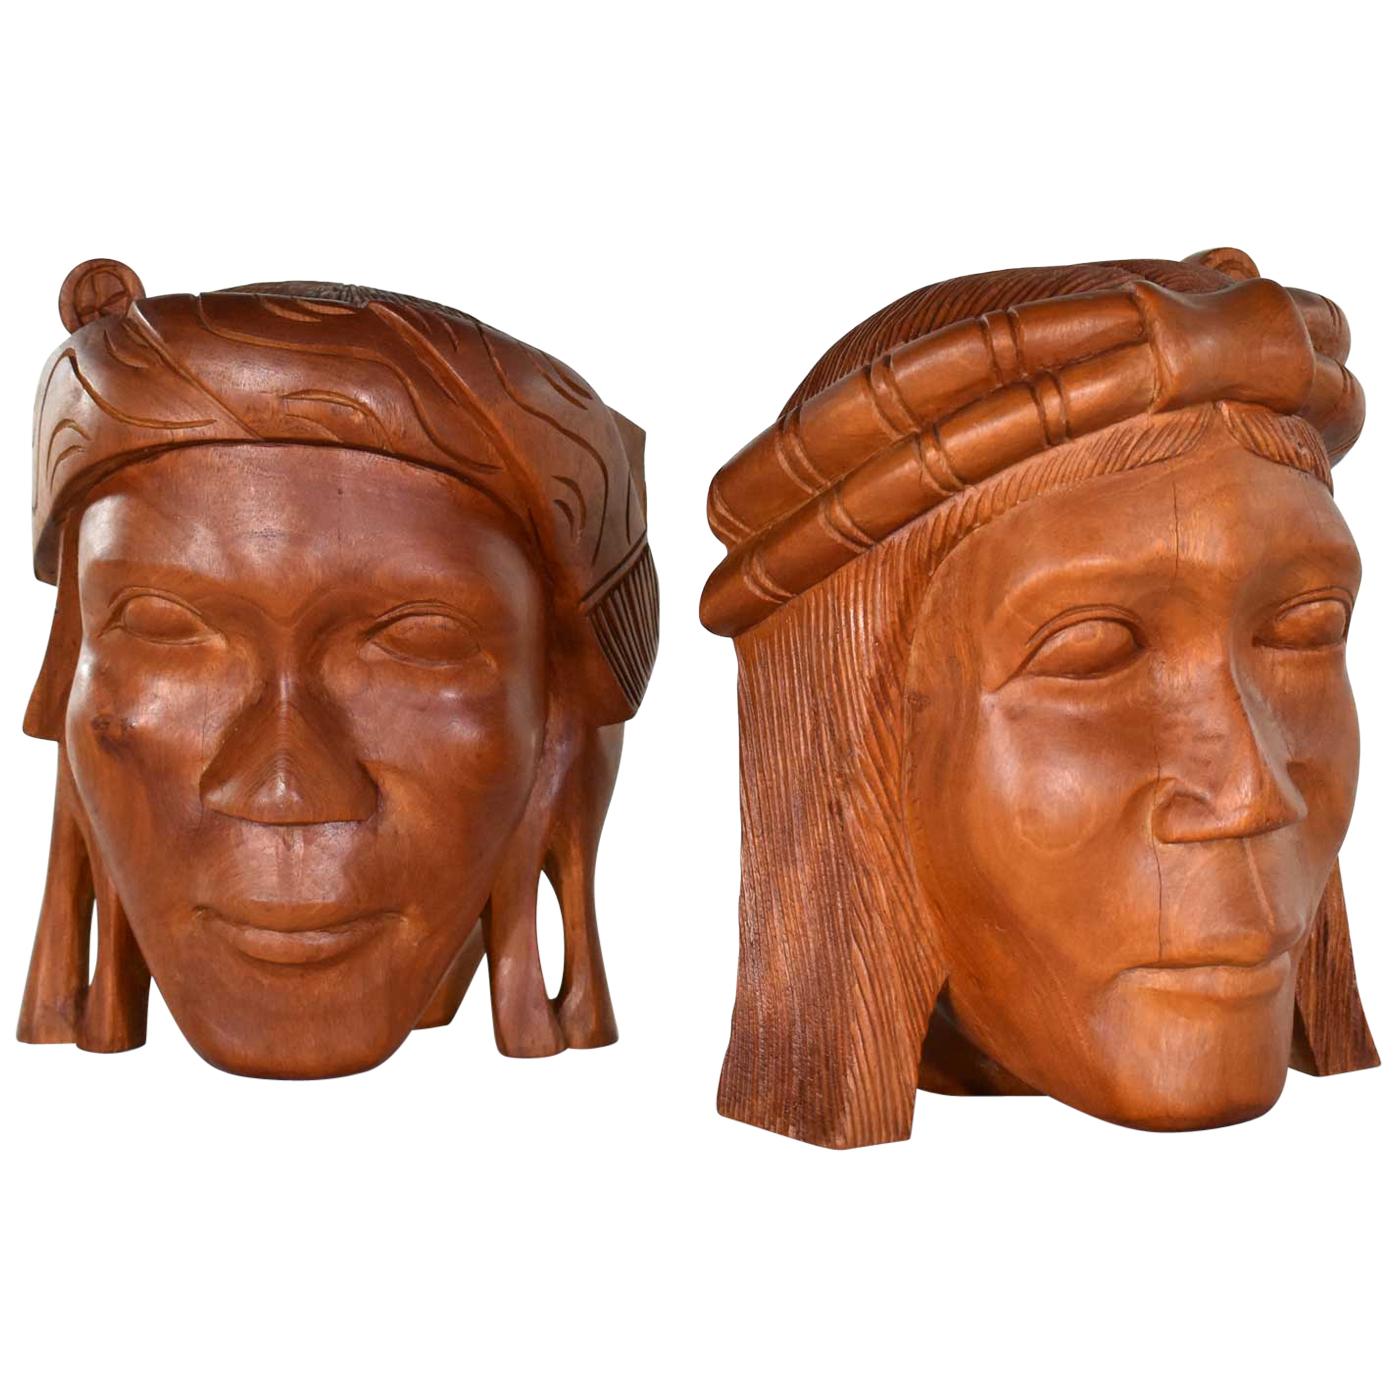 Vintage Tribal Carved Wood Figural Bookends Heads Only For Sale